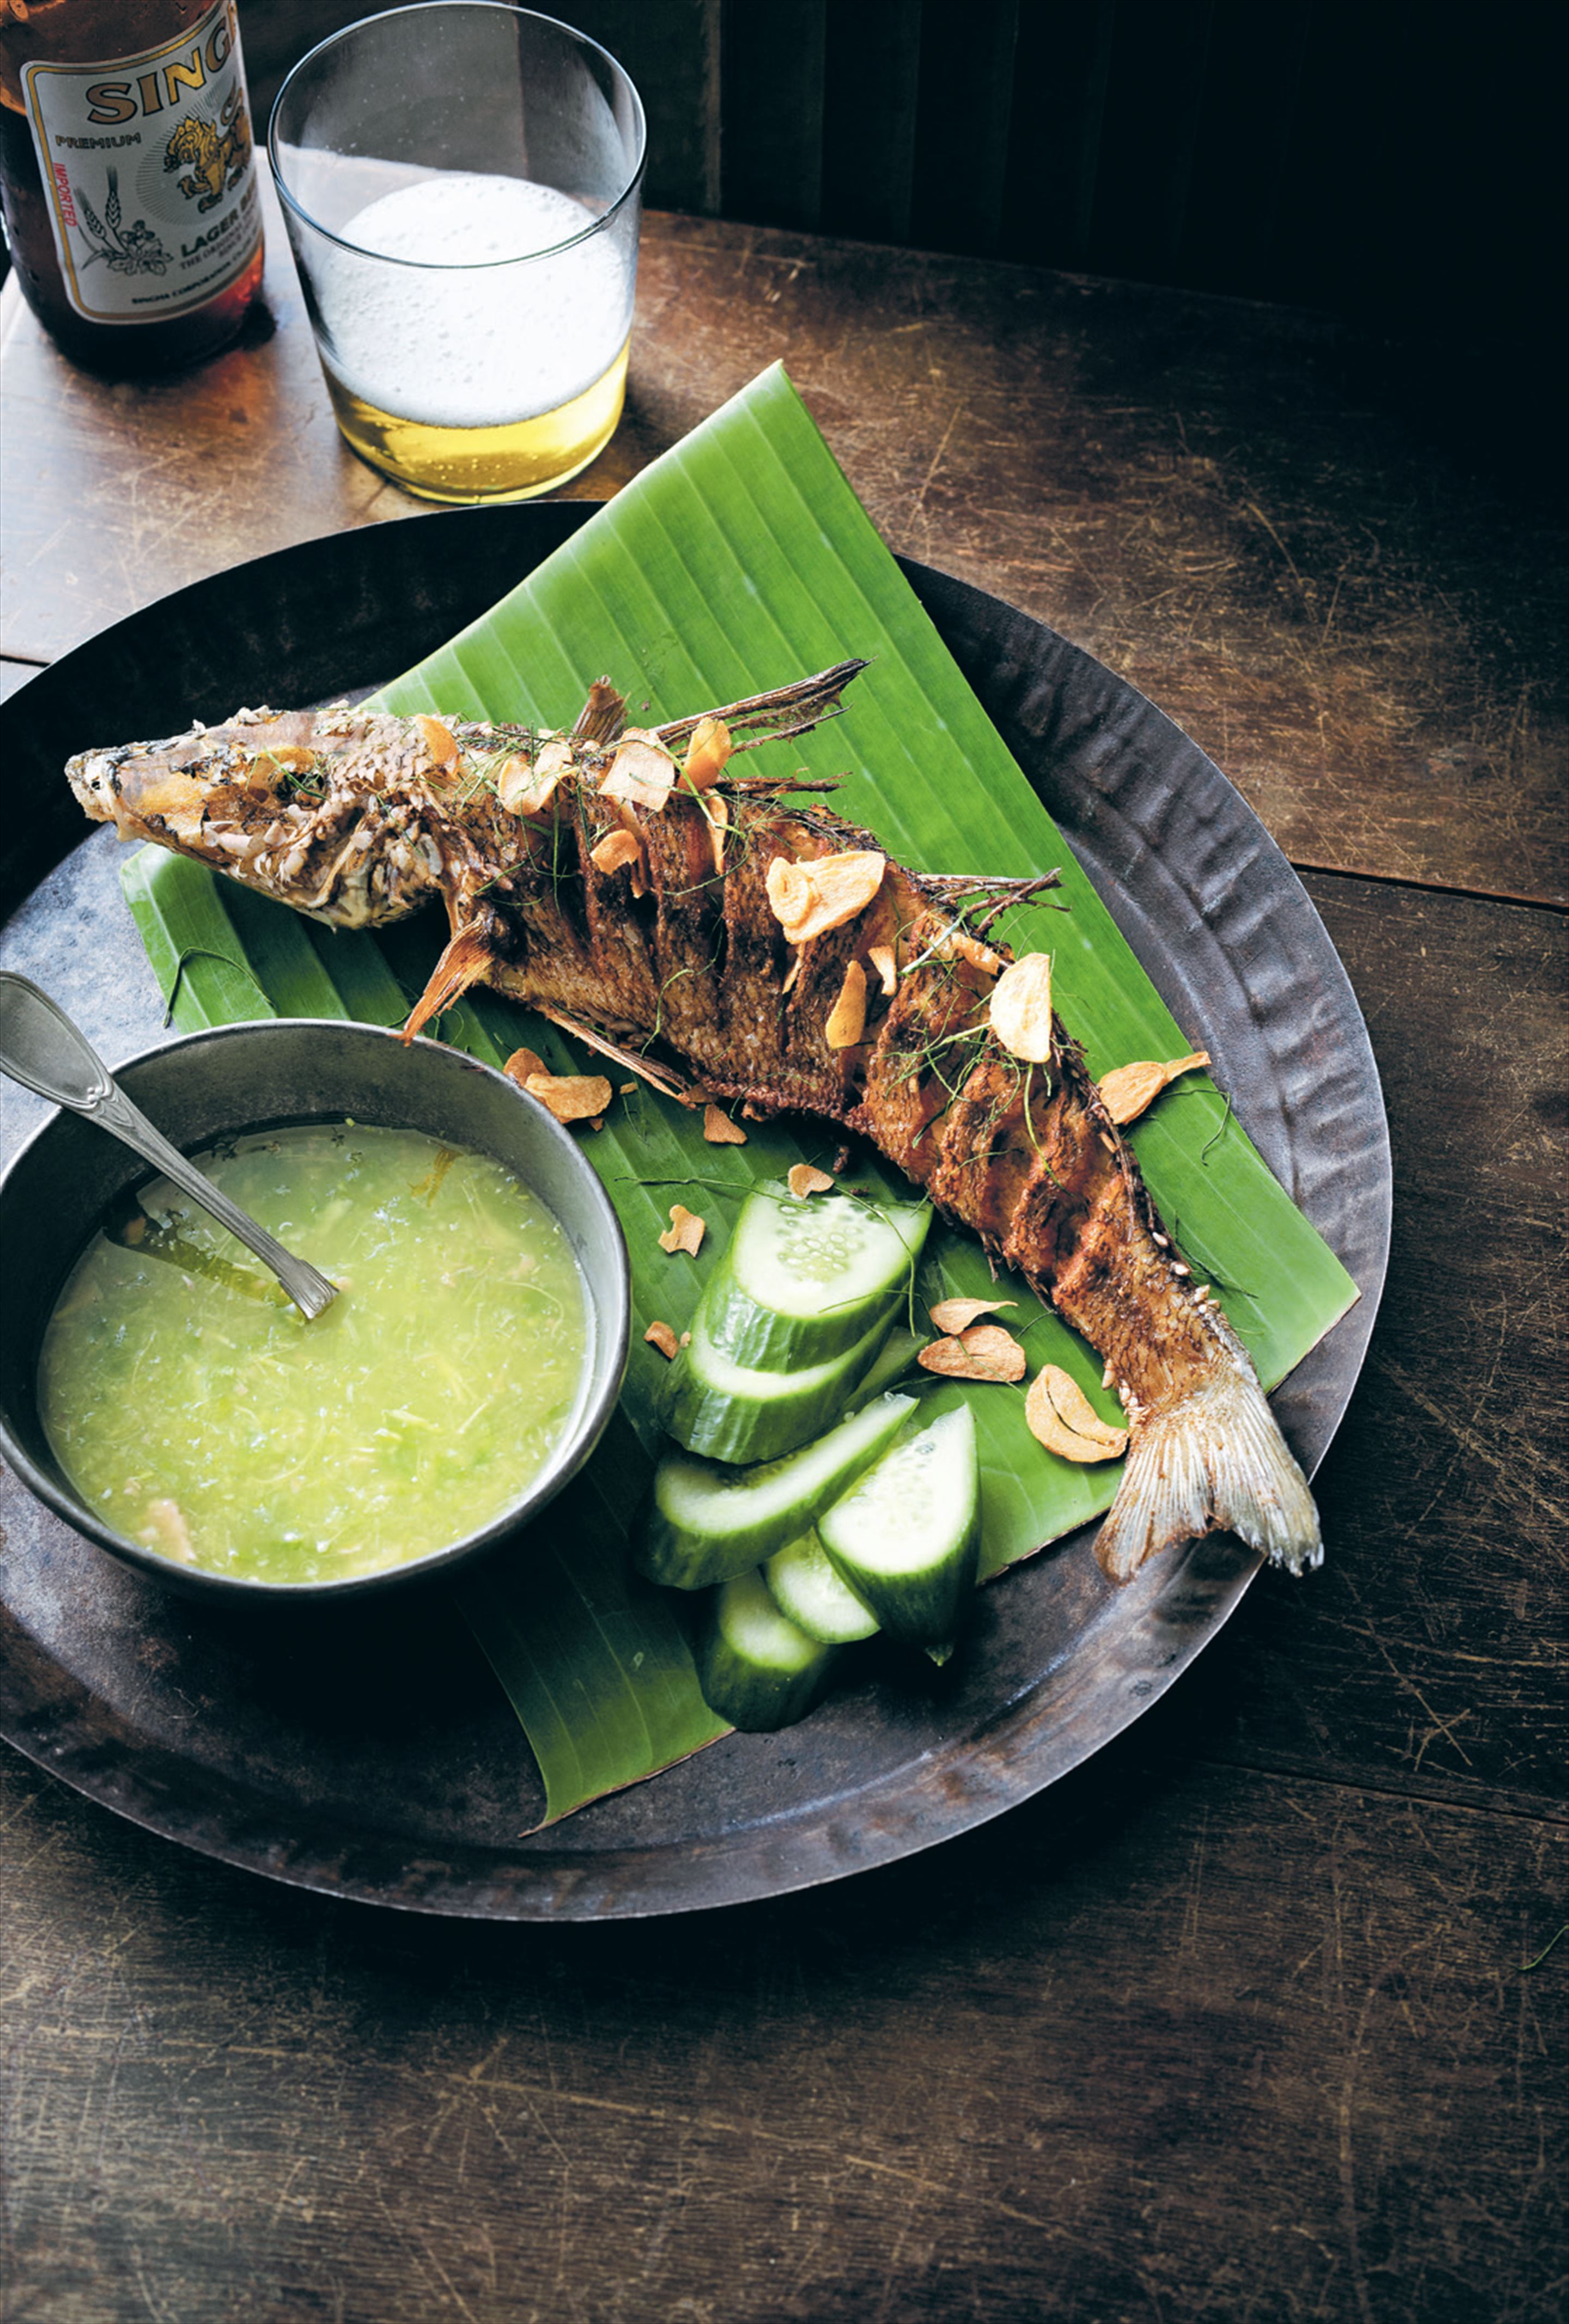 Crisp-fried whole whiting with green chilli nahm jim